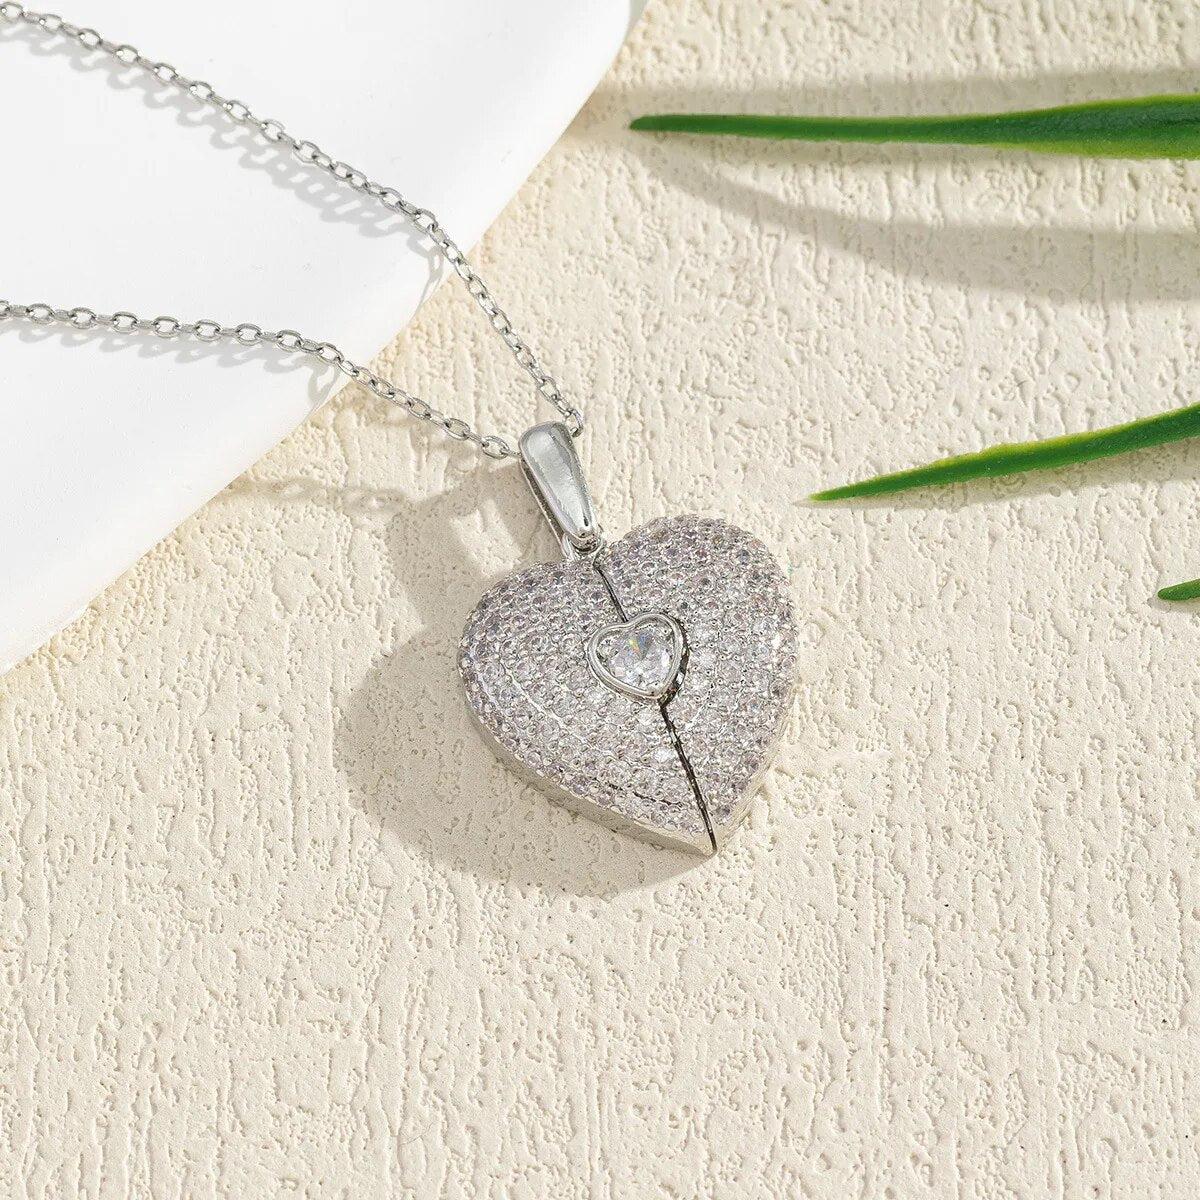 Openable Heart Crystal Personalized Necklace-Necklaces-NEVANNA